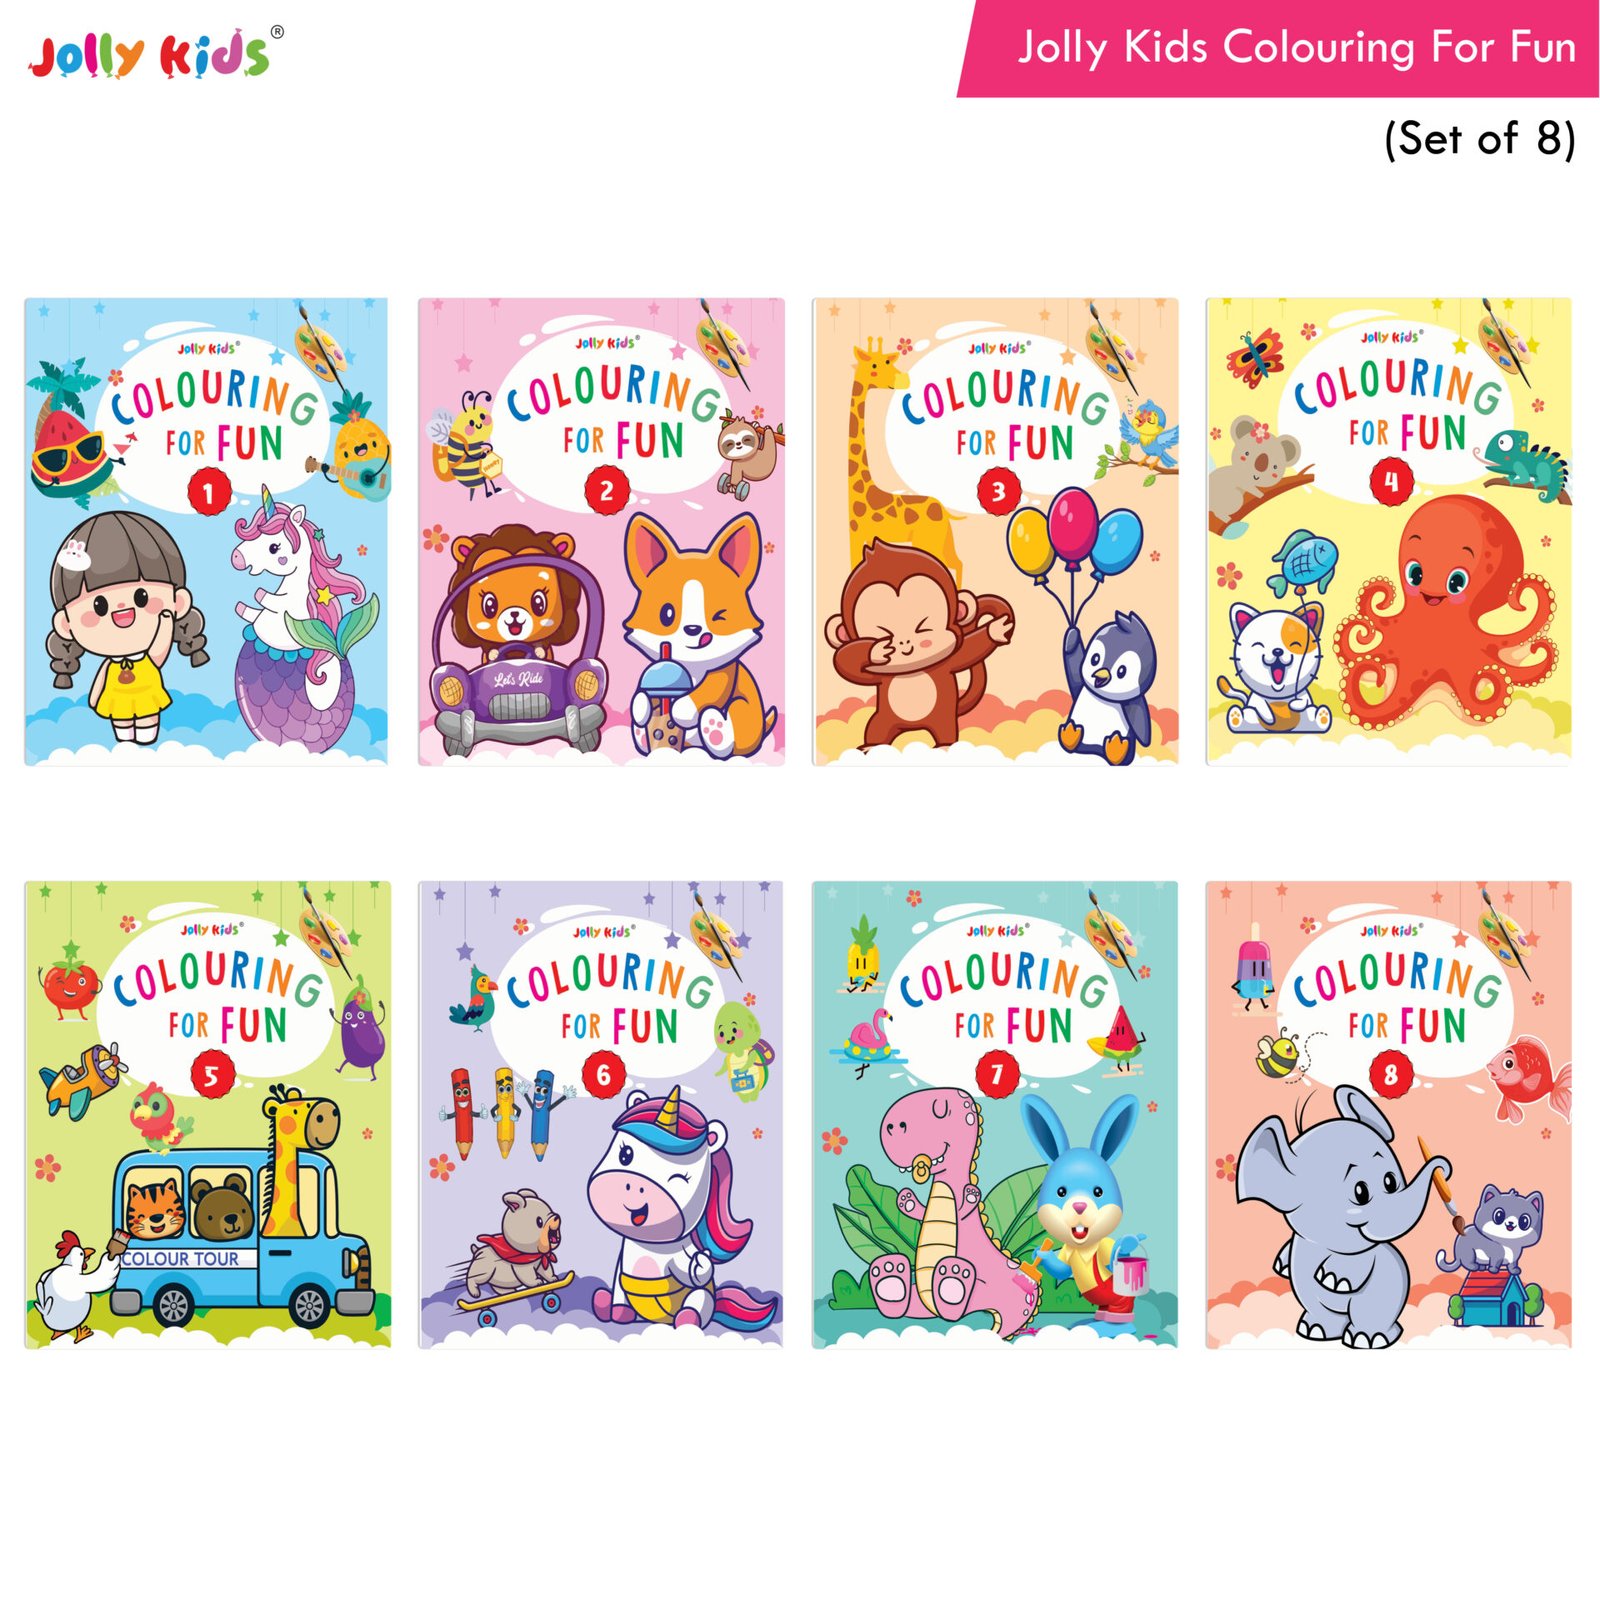 Jolly Kids Colouring For Fun Book Set of 8 1